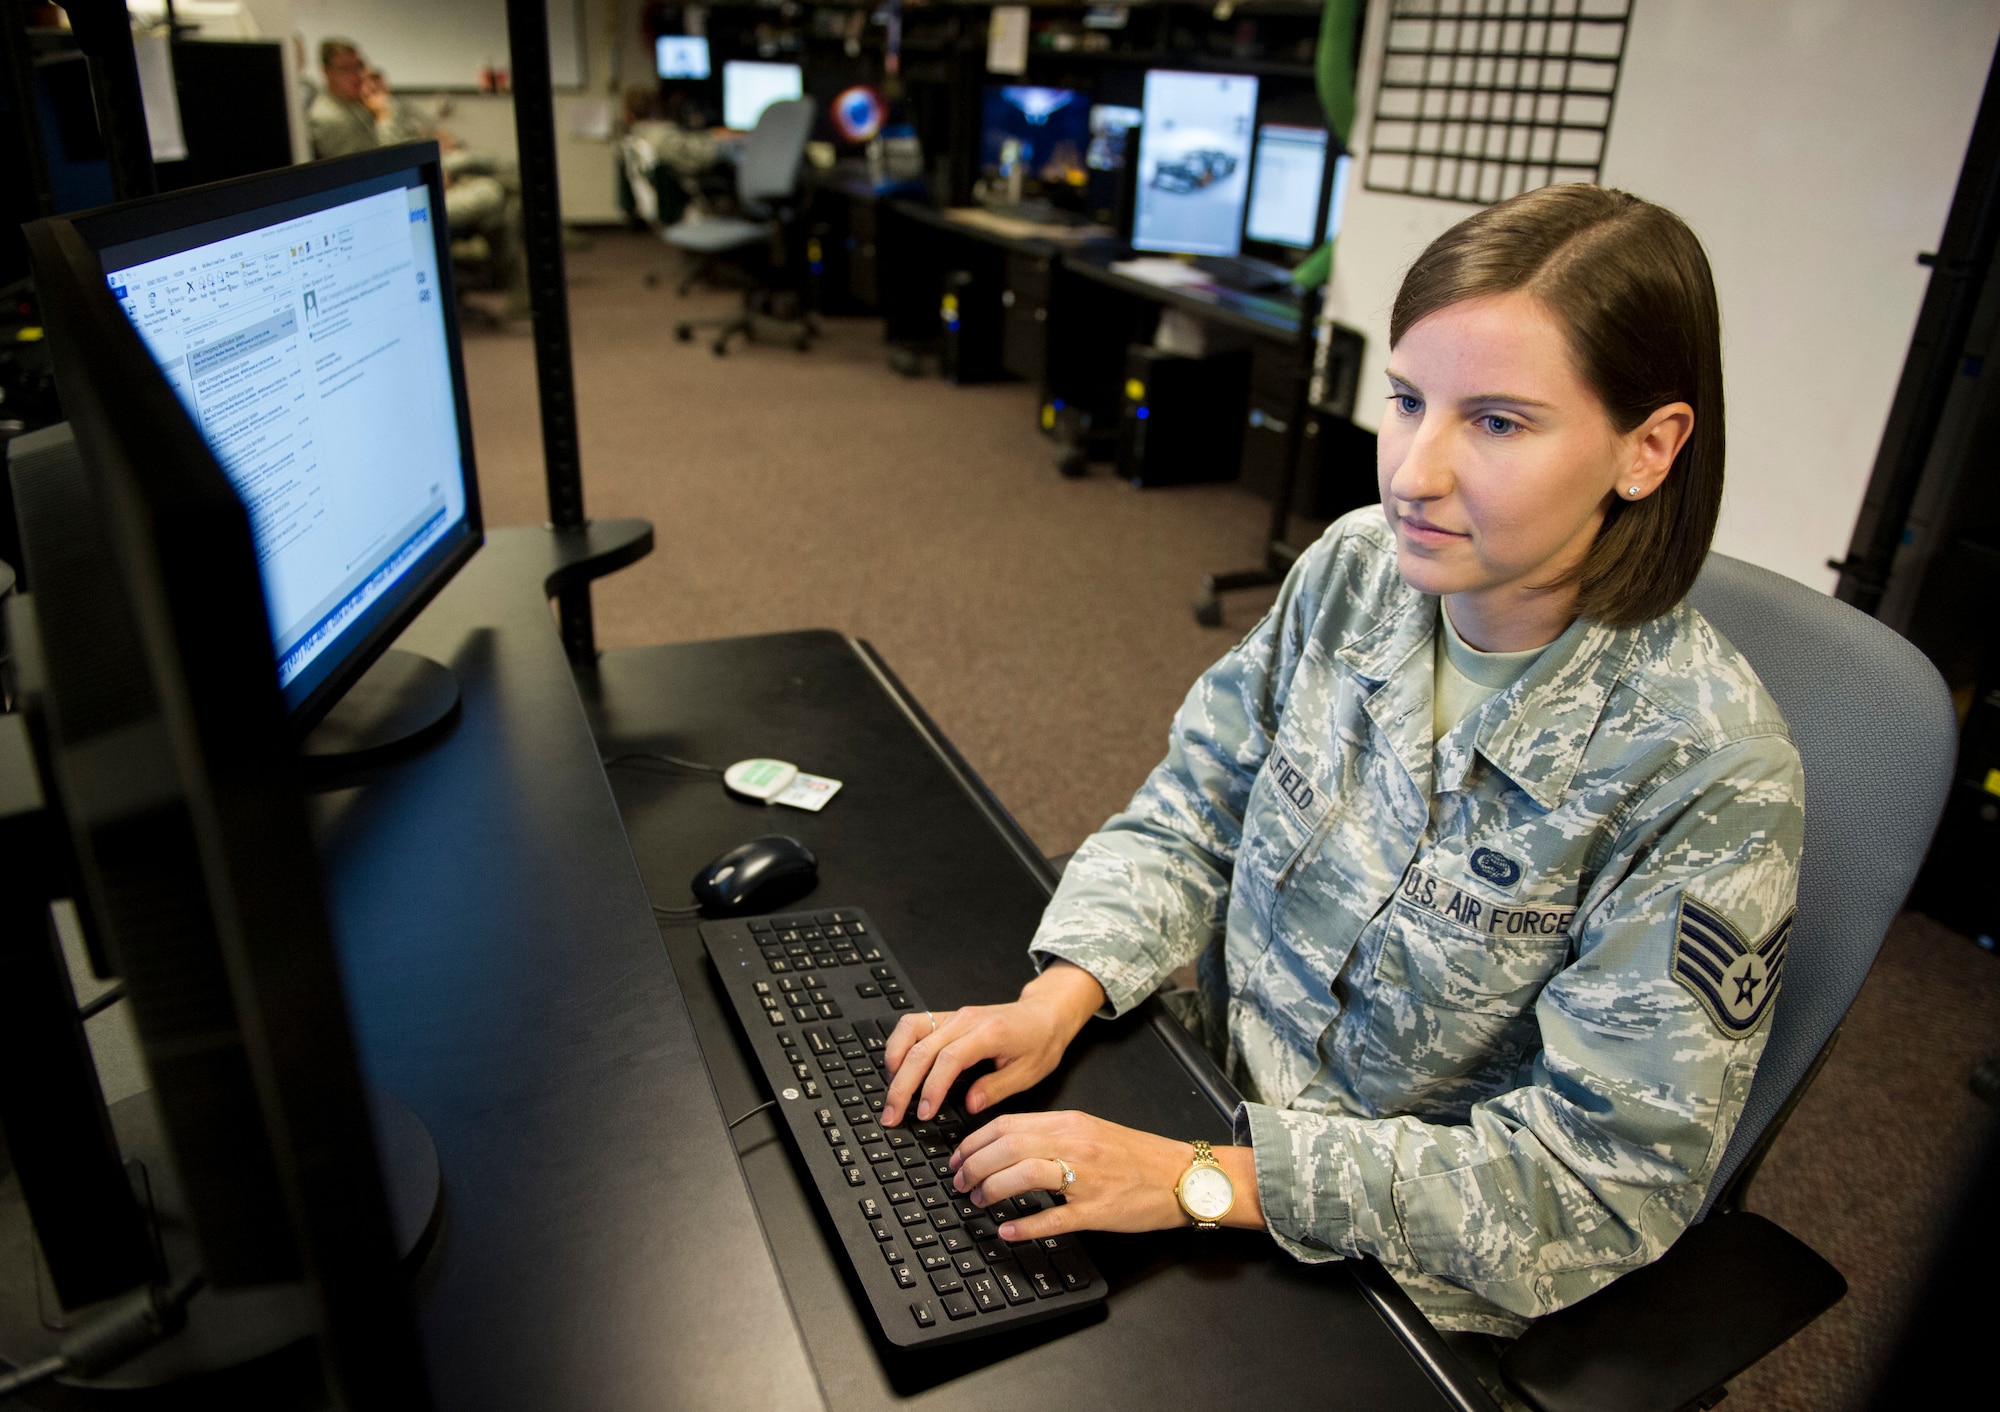 Staff Sgt. Elizabeth Caulfield, Signals Analysis Squadron scientific and technical signals analyst, conducts mission operations July 11 at the National Air and Space Intelligence Center on Wright-Patterson Air Force Base, Ohio. Caulfield was named one of the 12 Outstanding Airmen of the Year for the Air Force. (U.S. Air Force photo/ Senior Airman Michael Hunsaker)